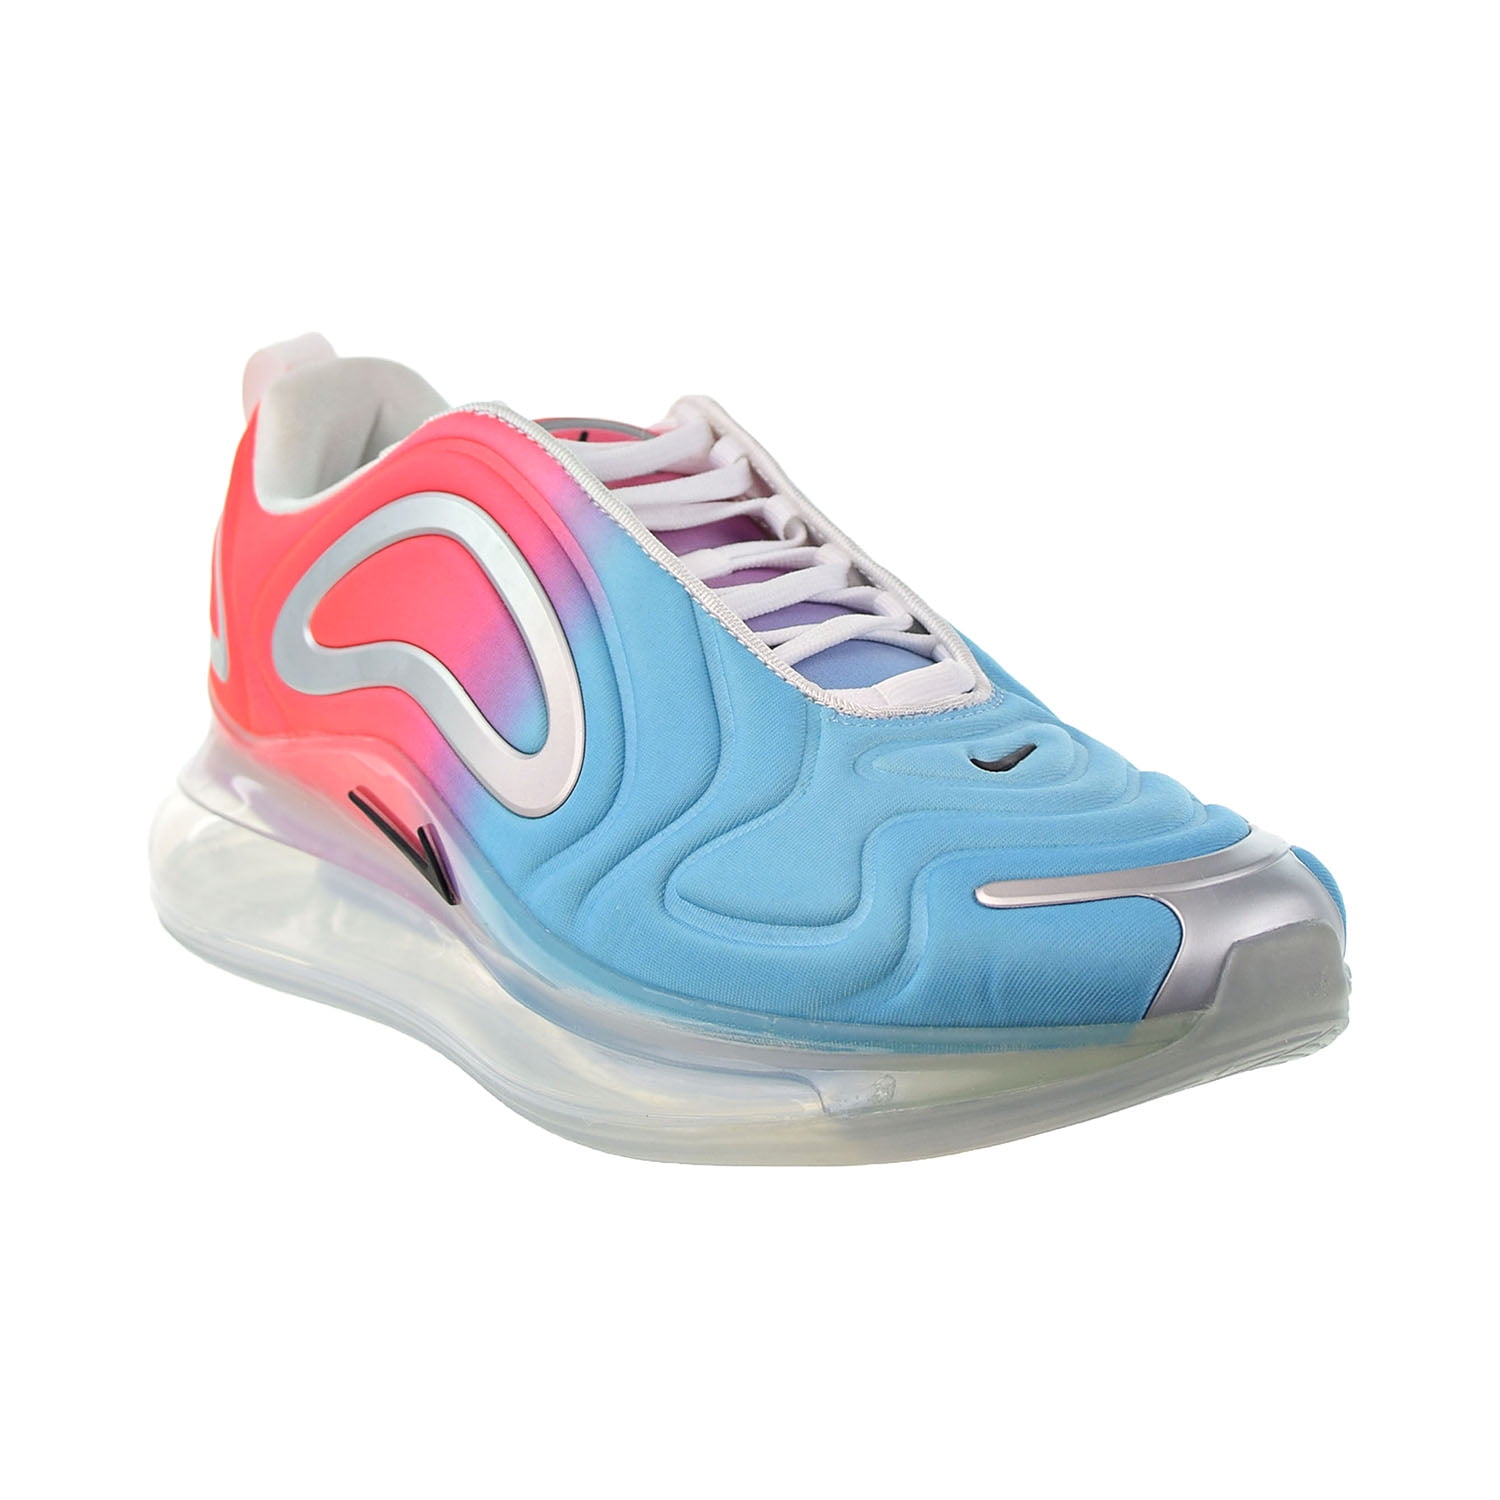 Nike Air Max 720 Pink Sea Sneakers - Multicolour for Women